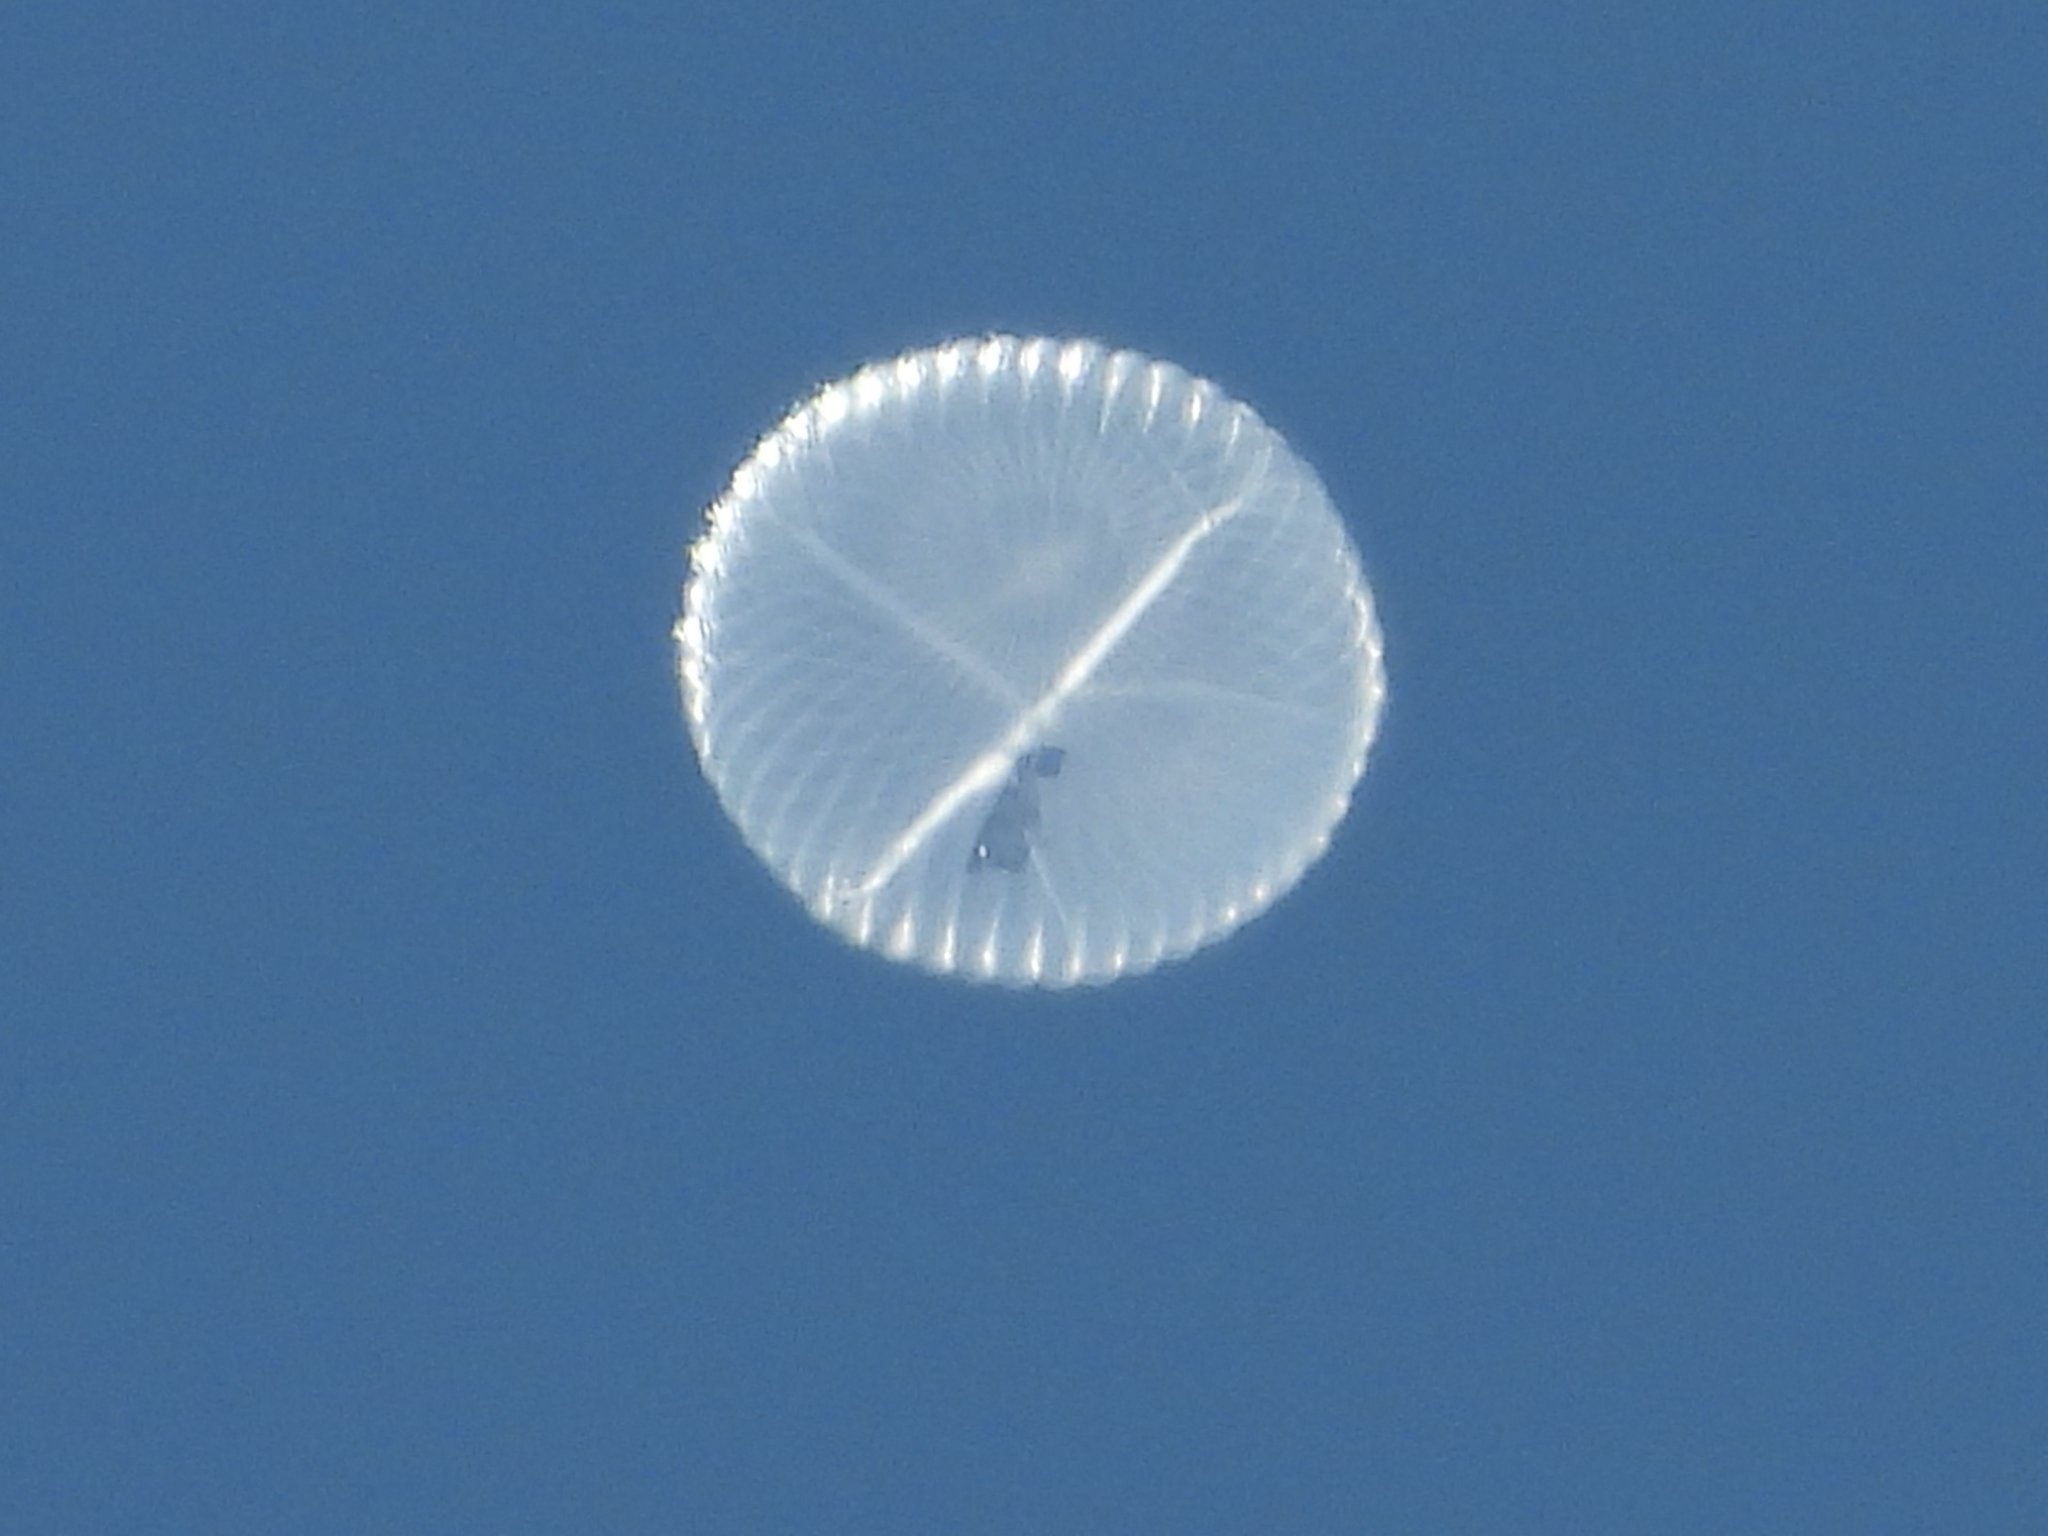 HBAL249 balloon spotted over northern Colorado on Aug. 3, 2020 (Image: twitter user @vcdgf555 )